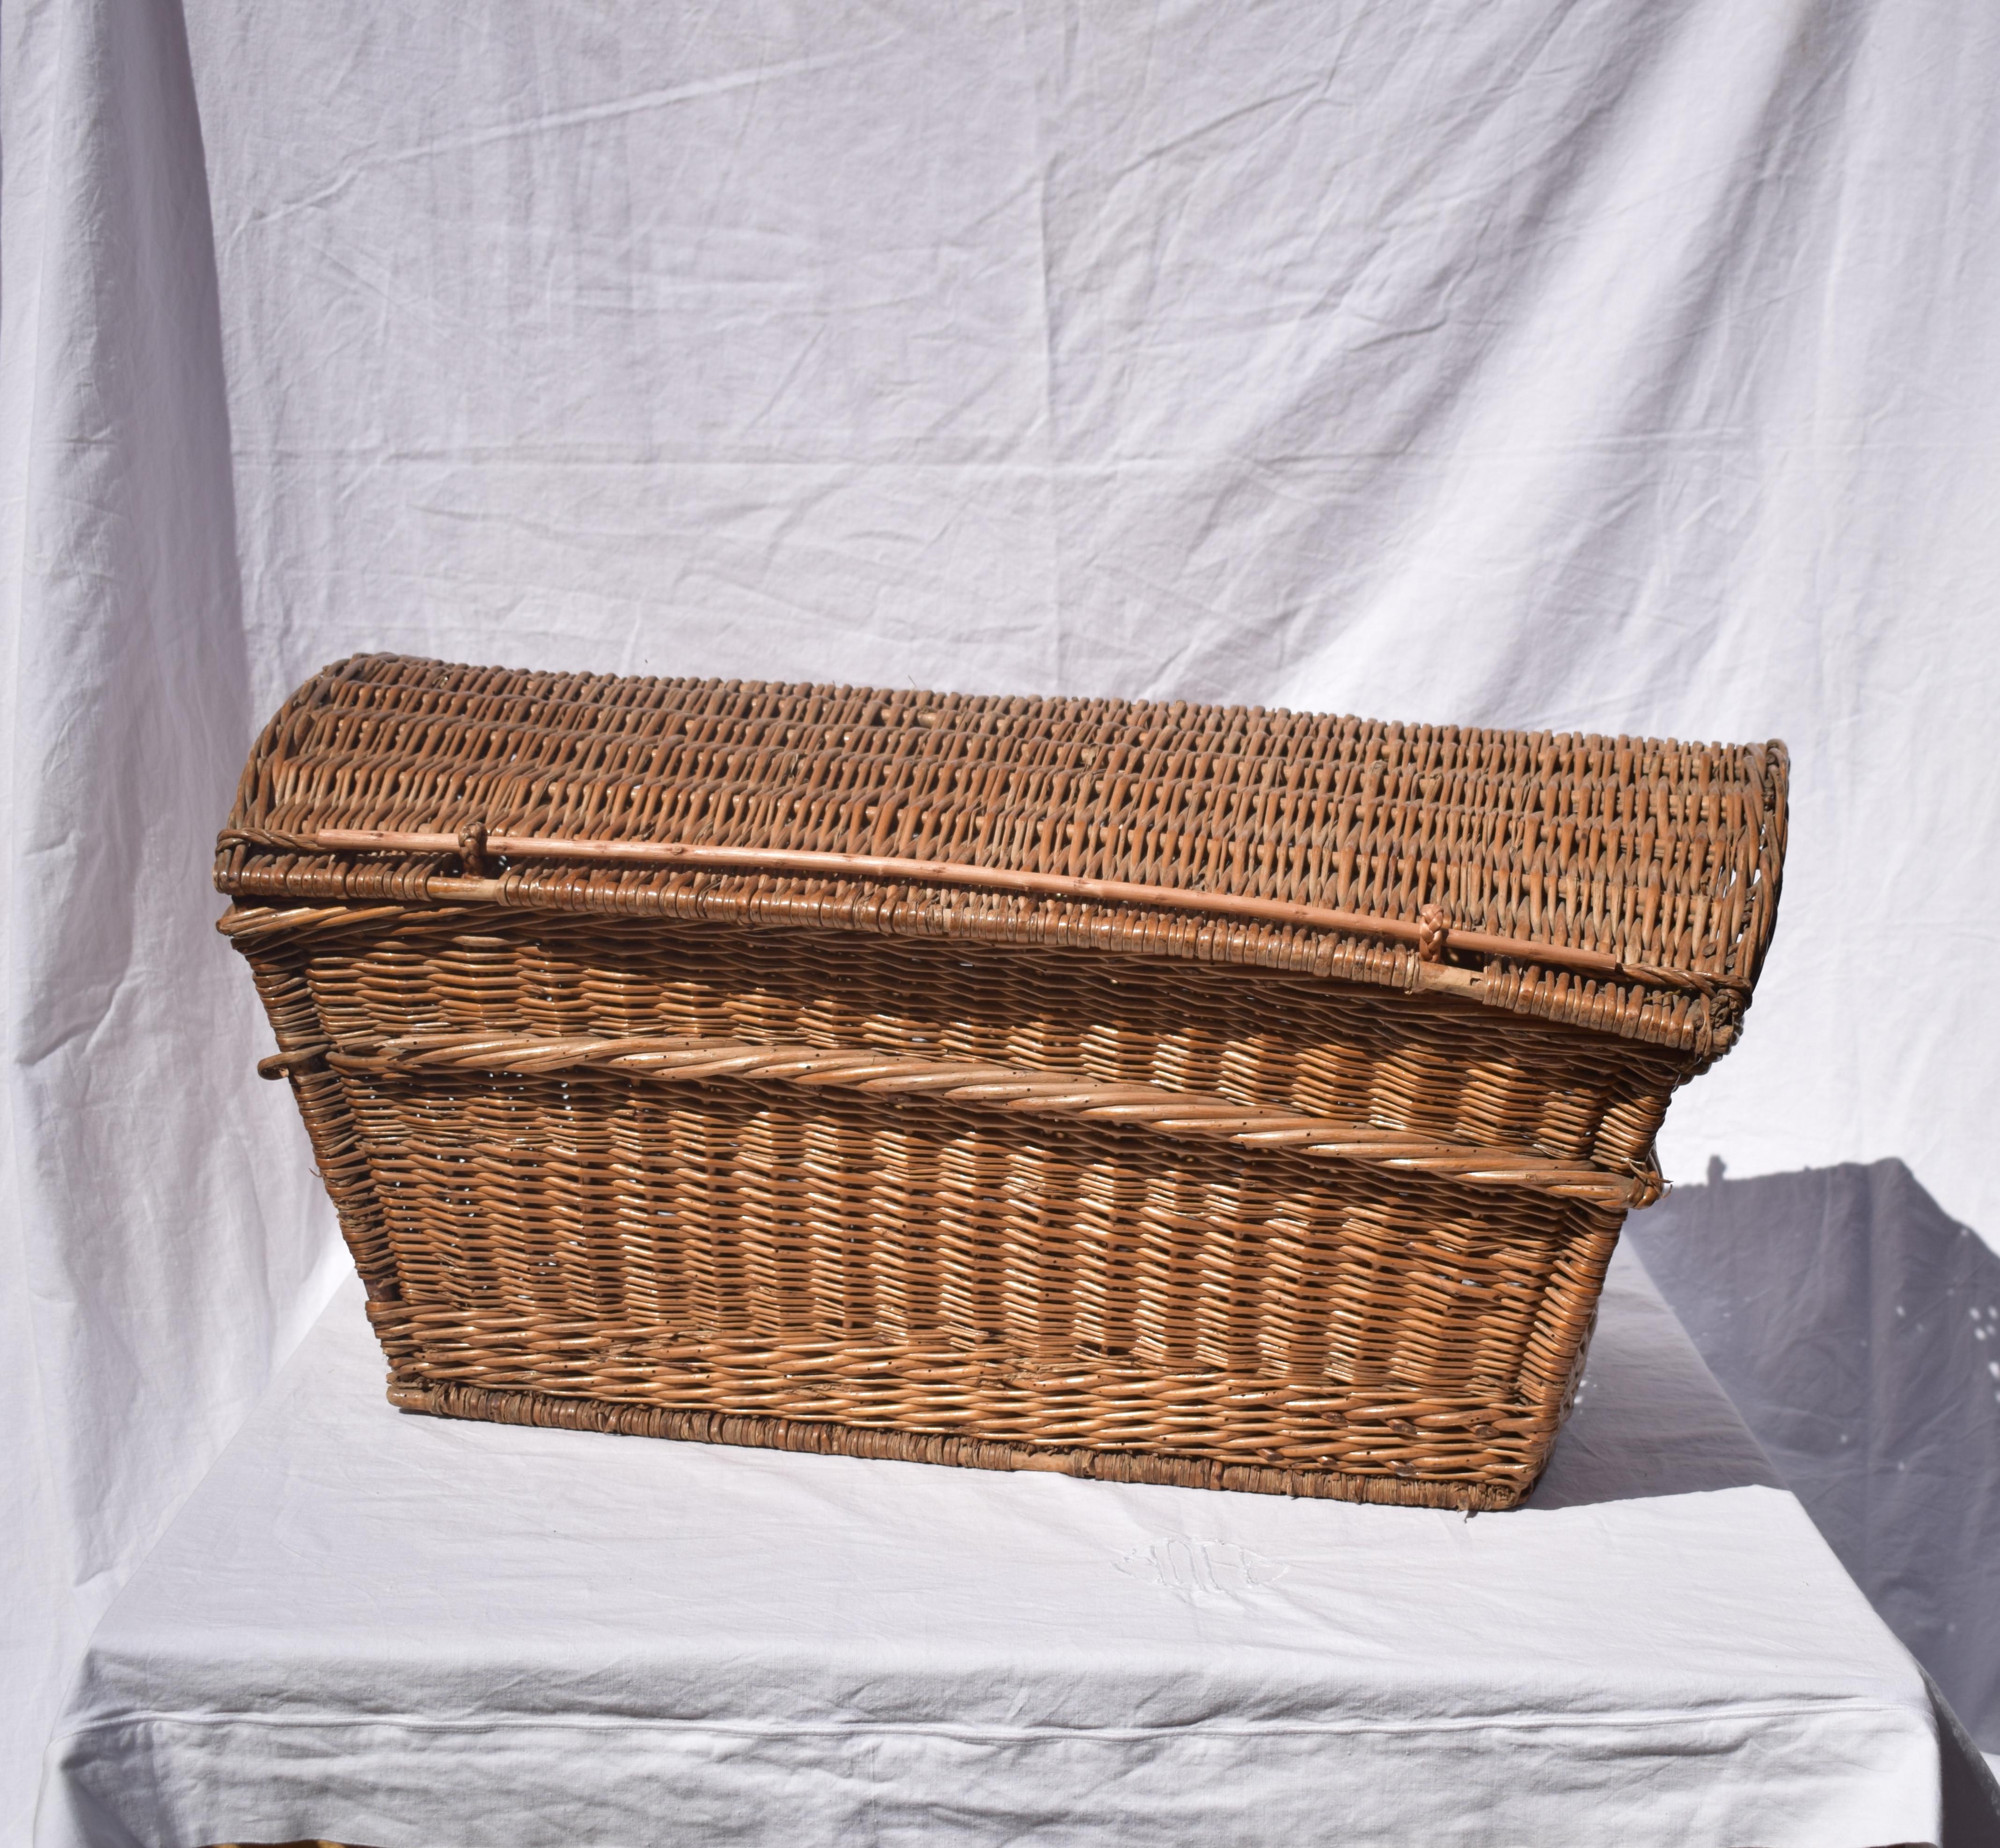 A large 19th century French wicker case with lid. Very sturdy. Woven in a thick wicker with original features. Some areas of the case have been restored and the wicker has been treated for woodworm.